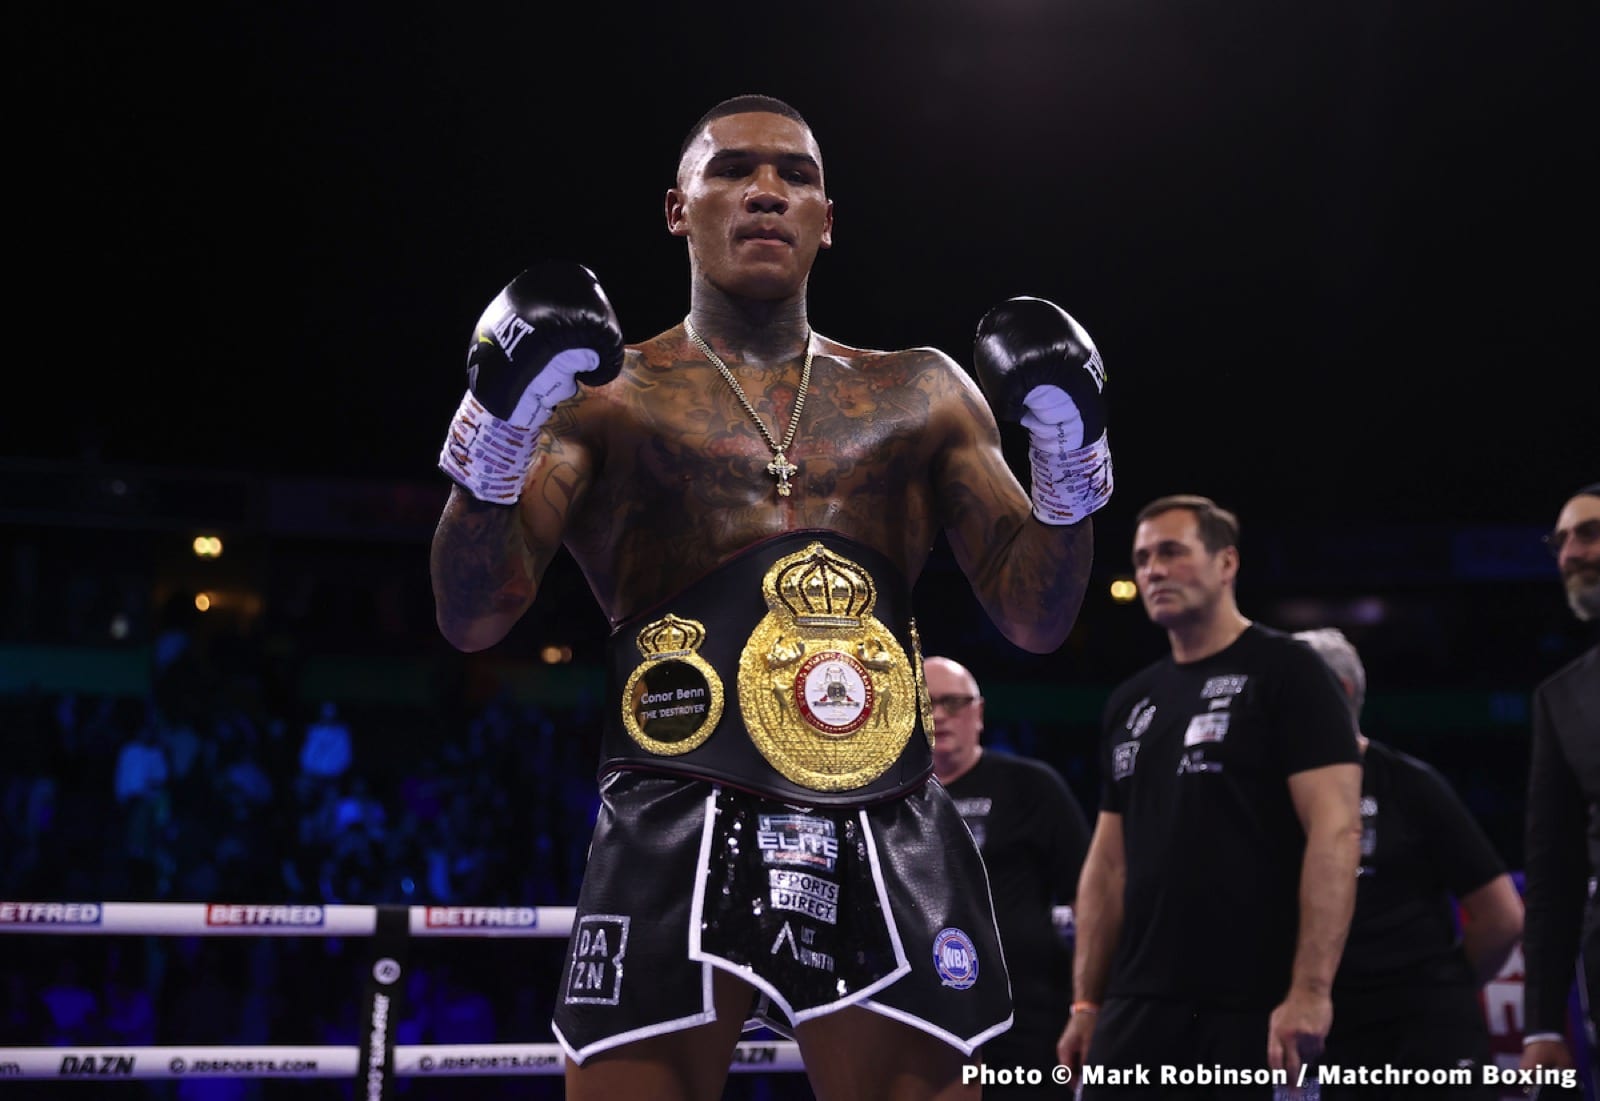 Image: Conor Benn says Thurman won't fight him, "May as well retire"